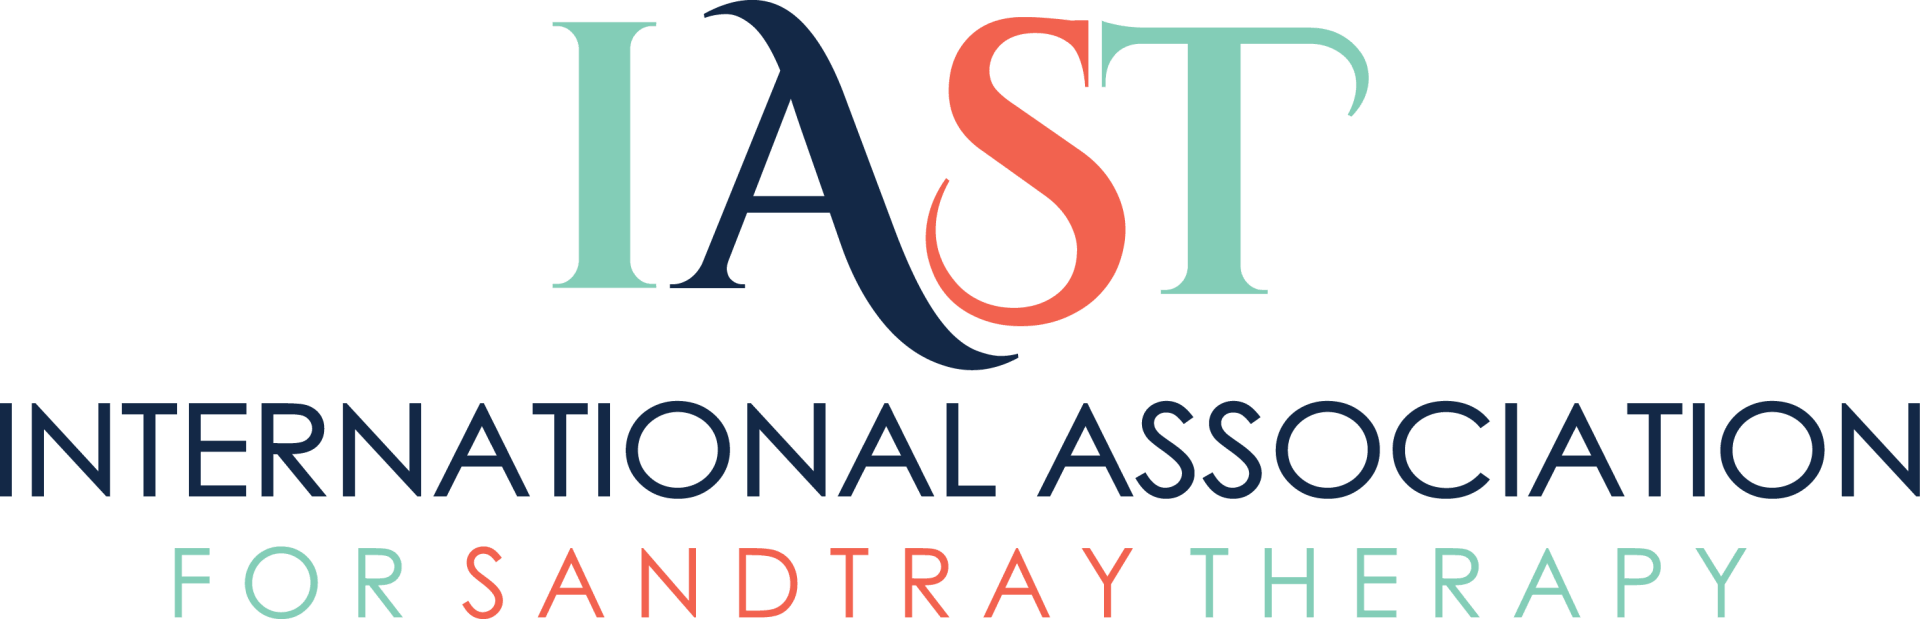 International association for sandtray therapy logo in color